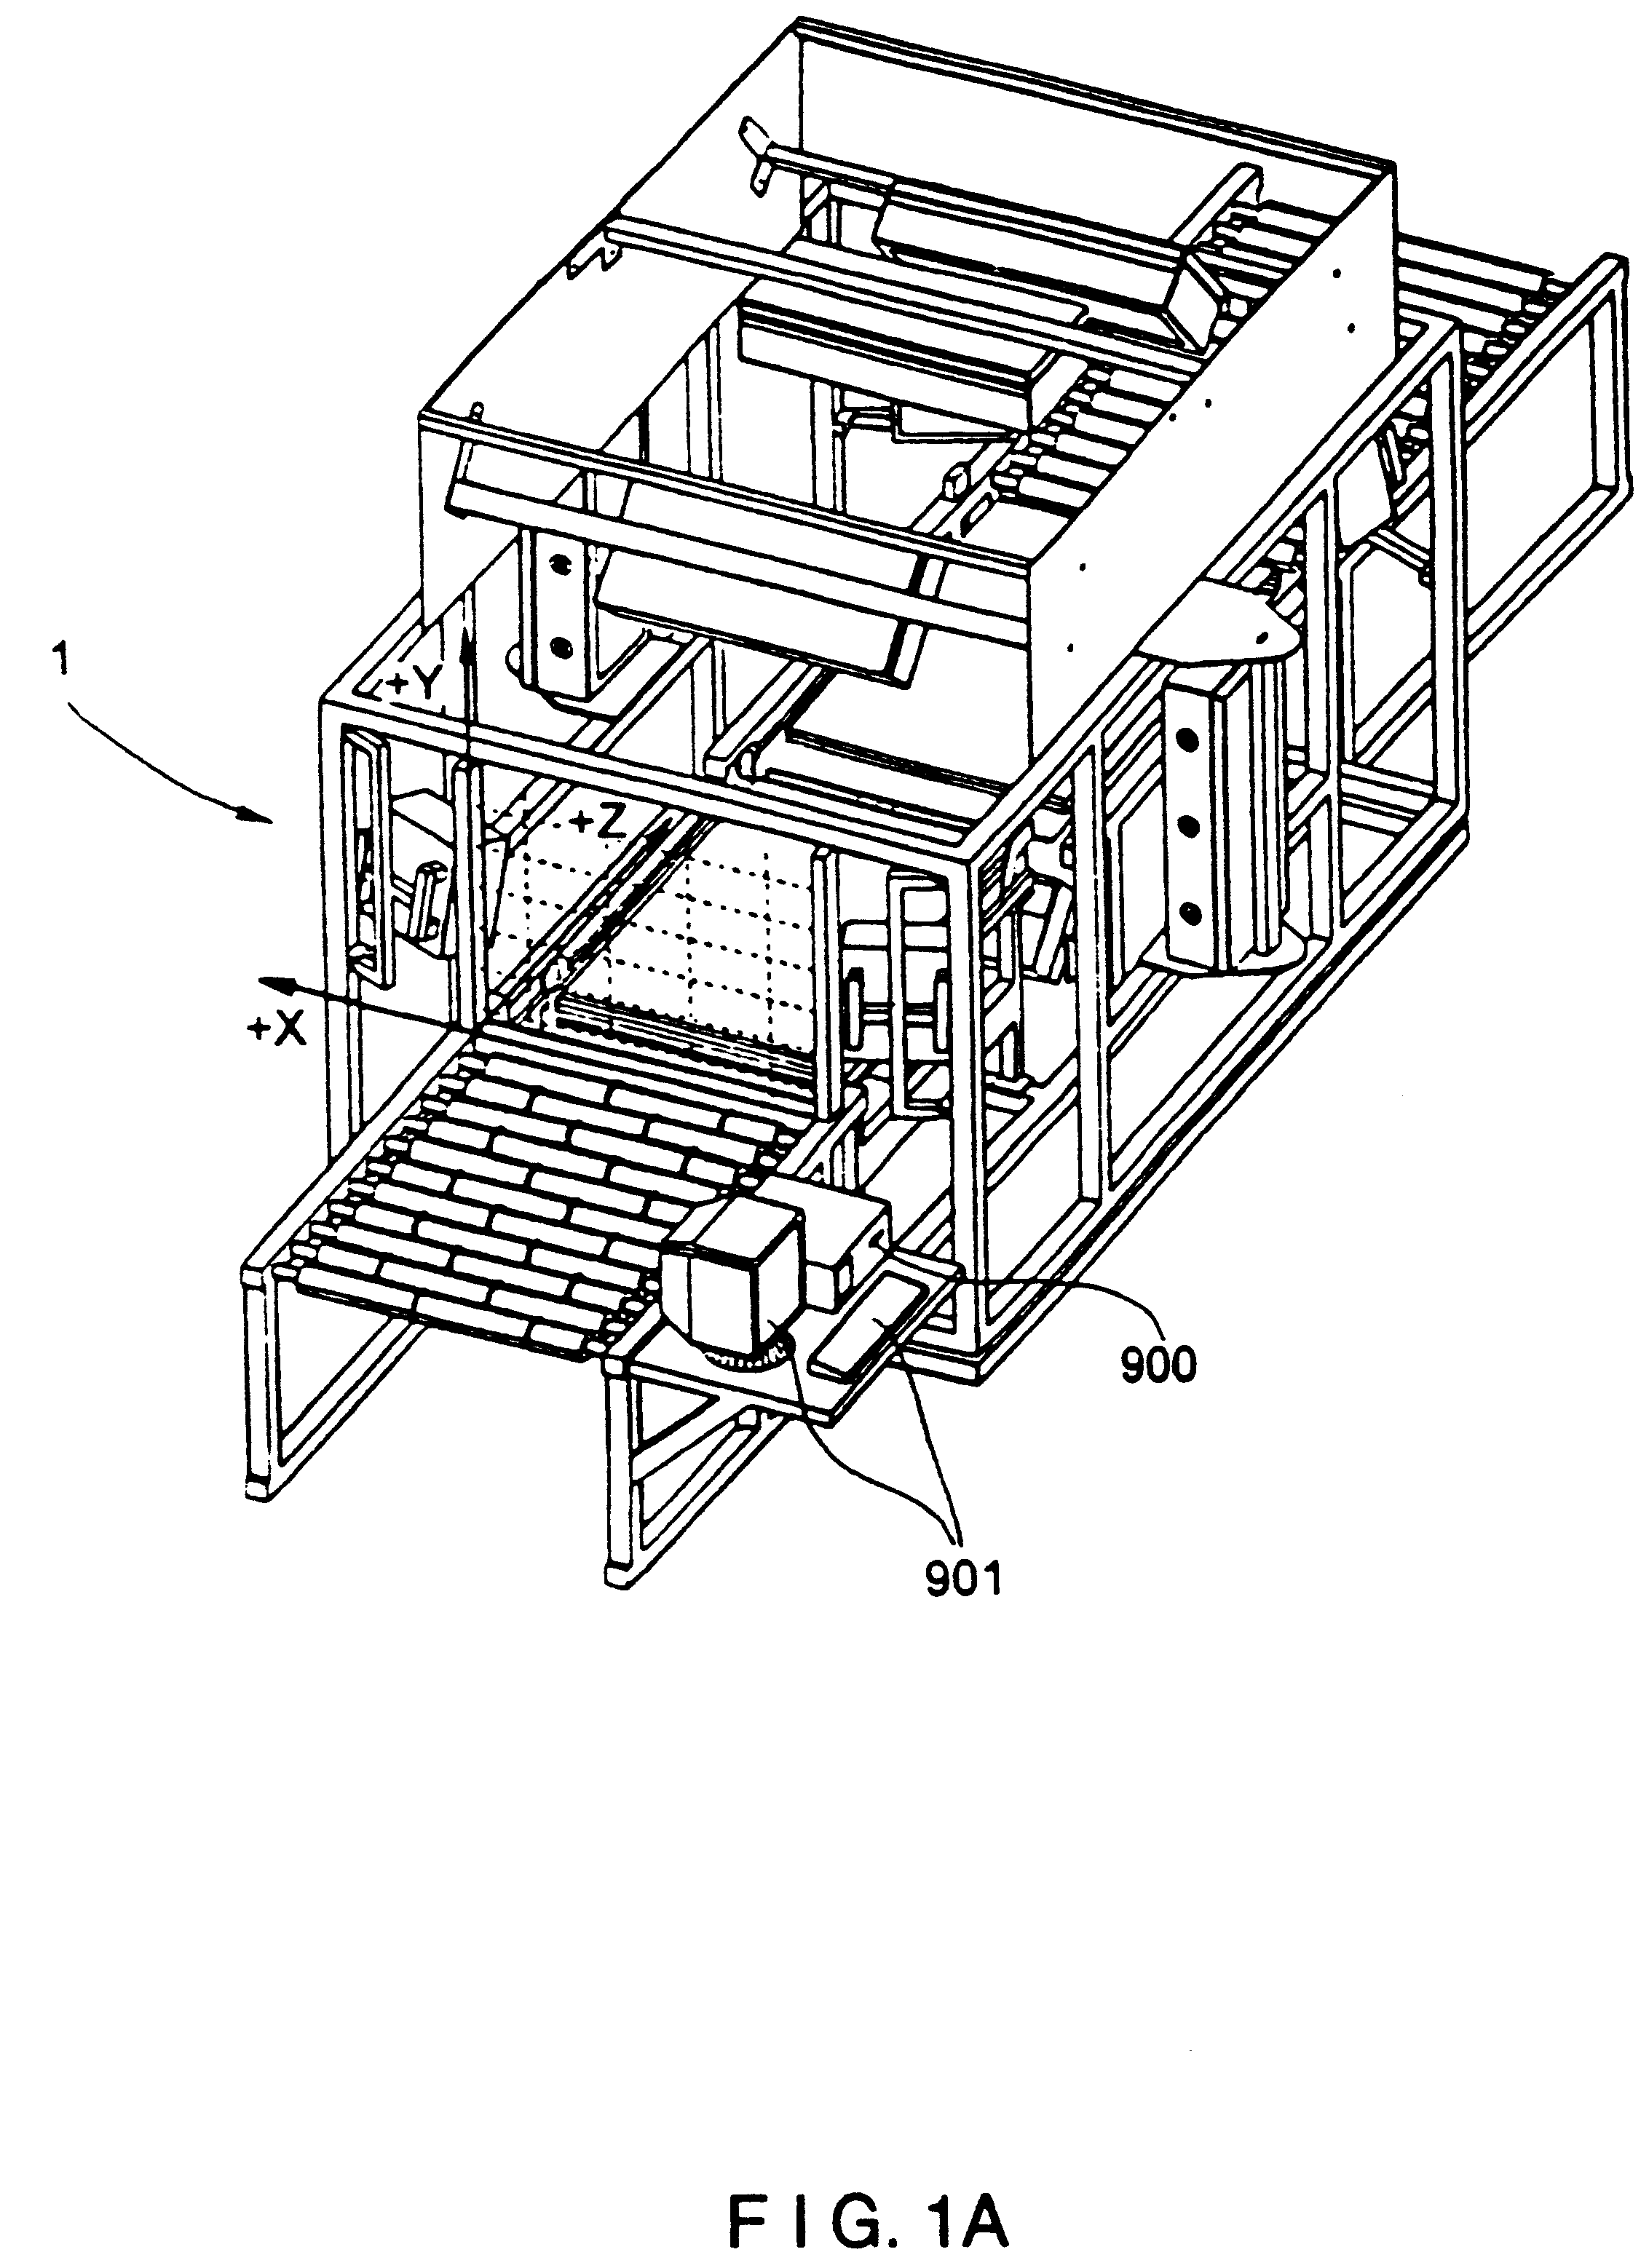 Automated system and method for identifying and measuring packages transported through a laser scanning tunnel